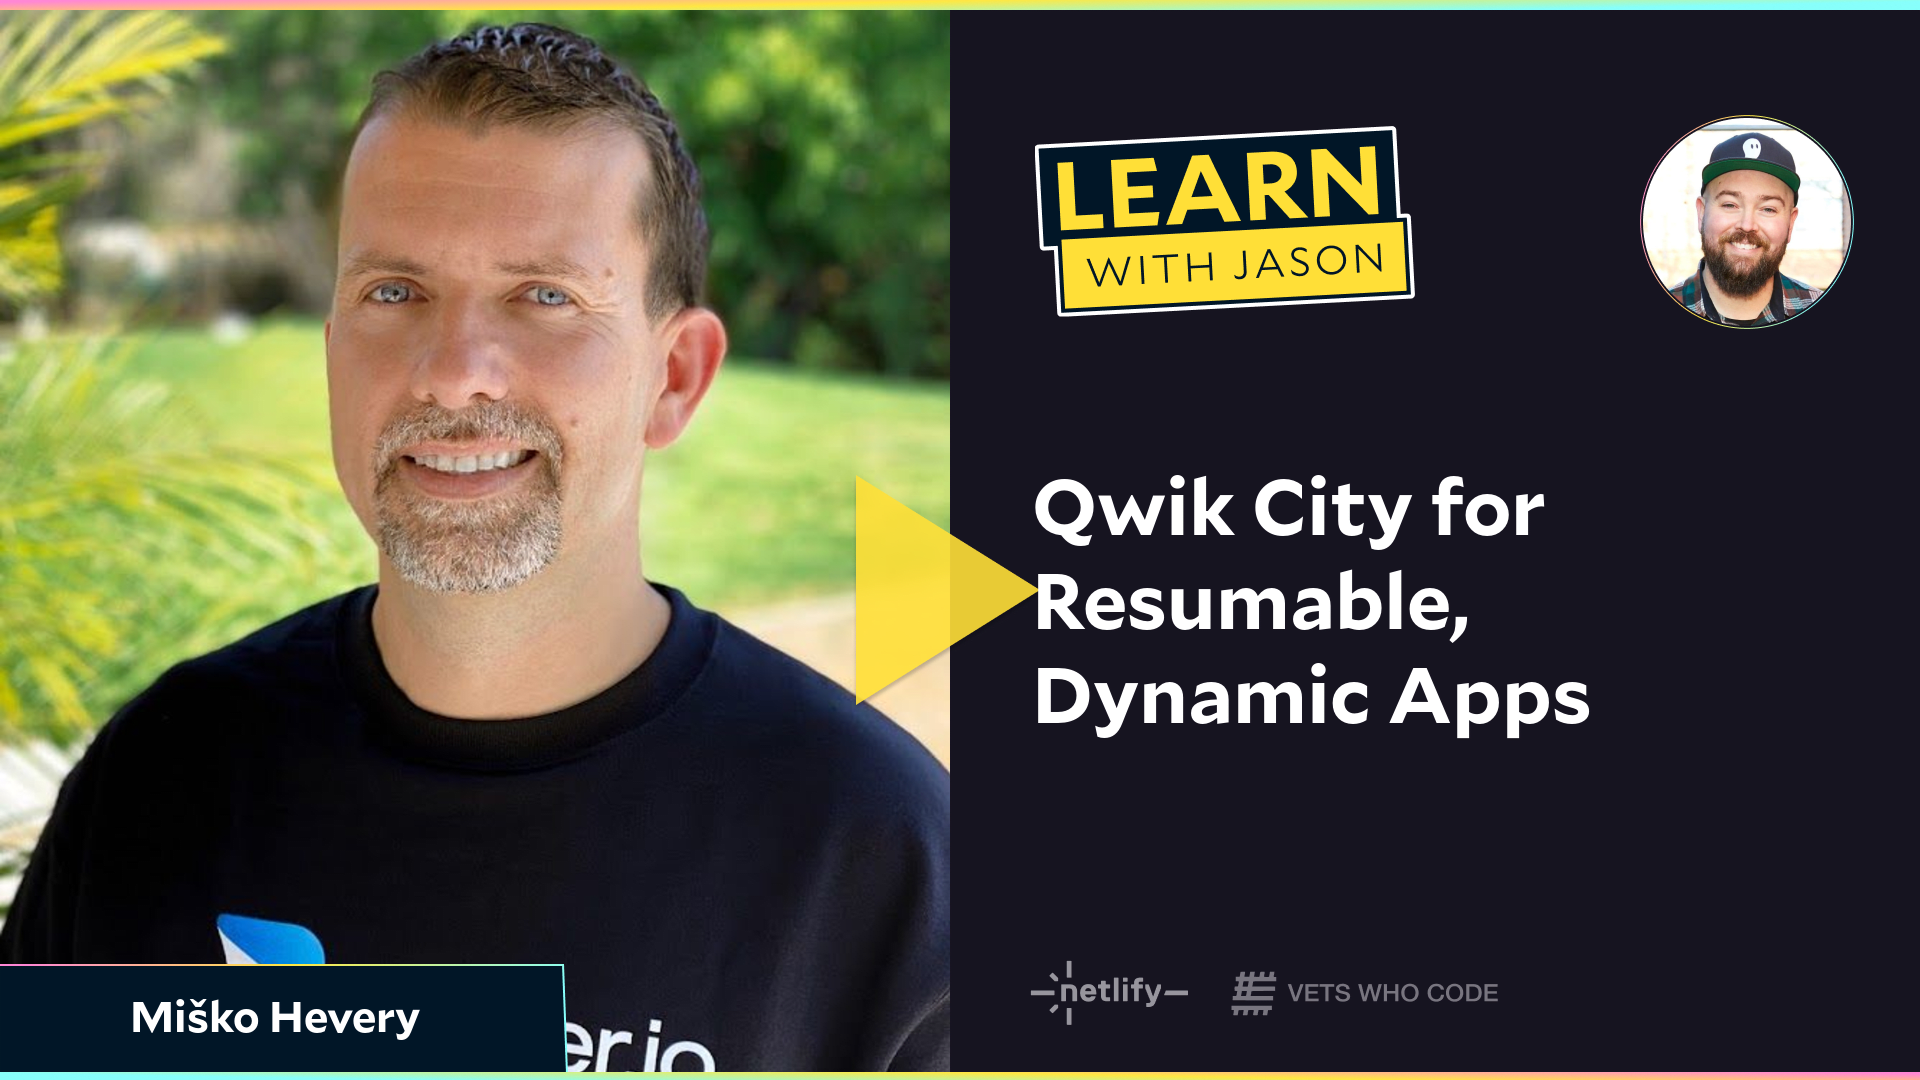 Qwik City for Resumable, Dynamic Apps (with Miško Hevery)